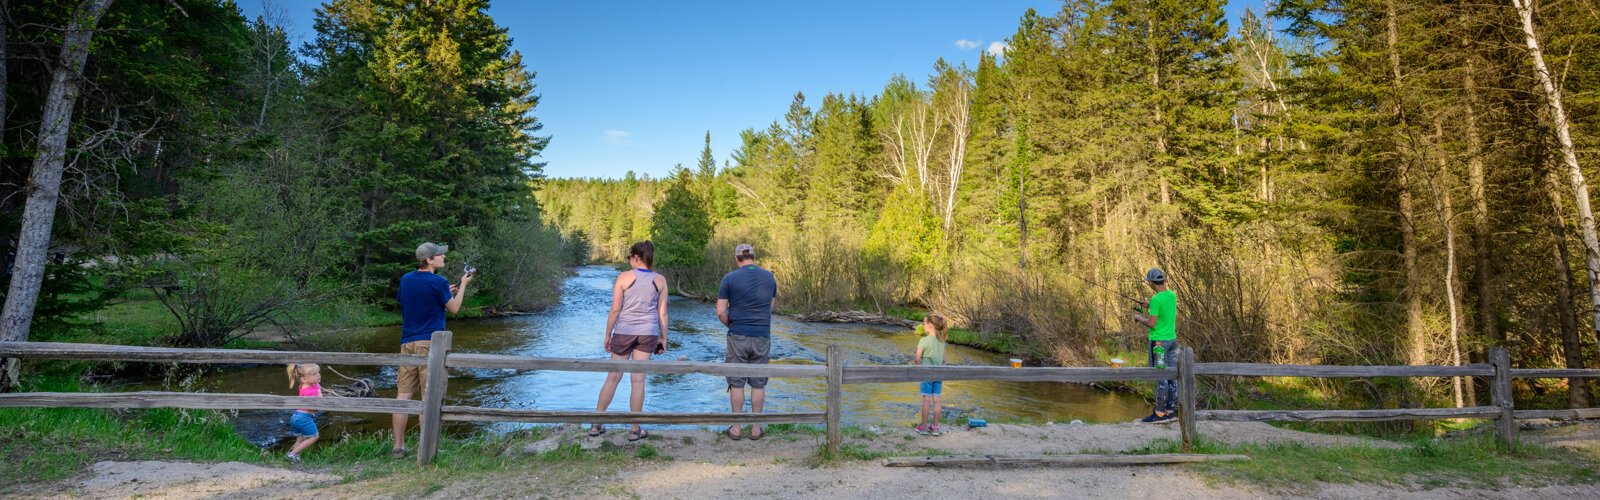 Families enjoy the Pigeon River State Forest on Memorial Day Weekend.